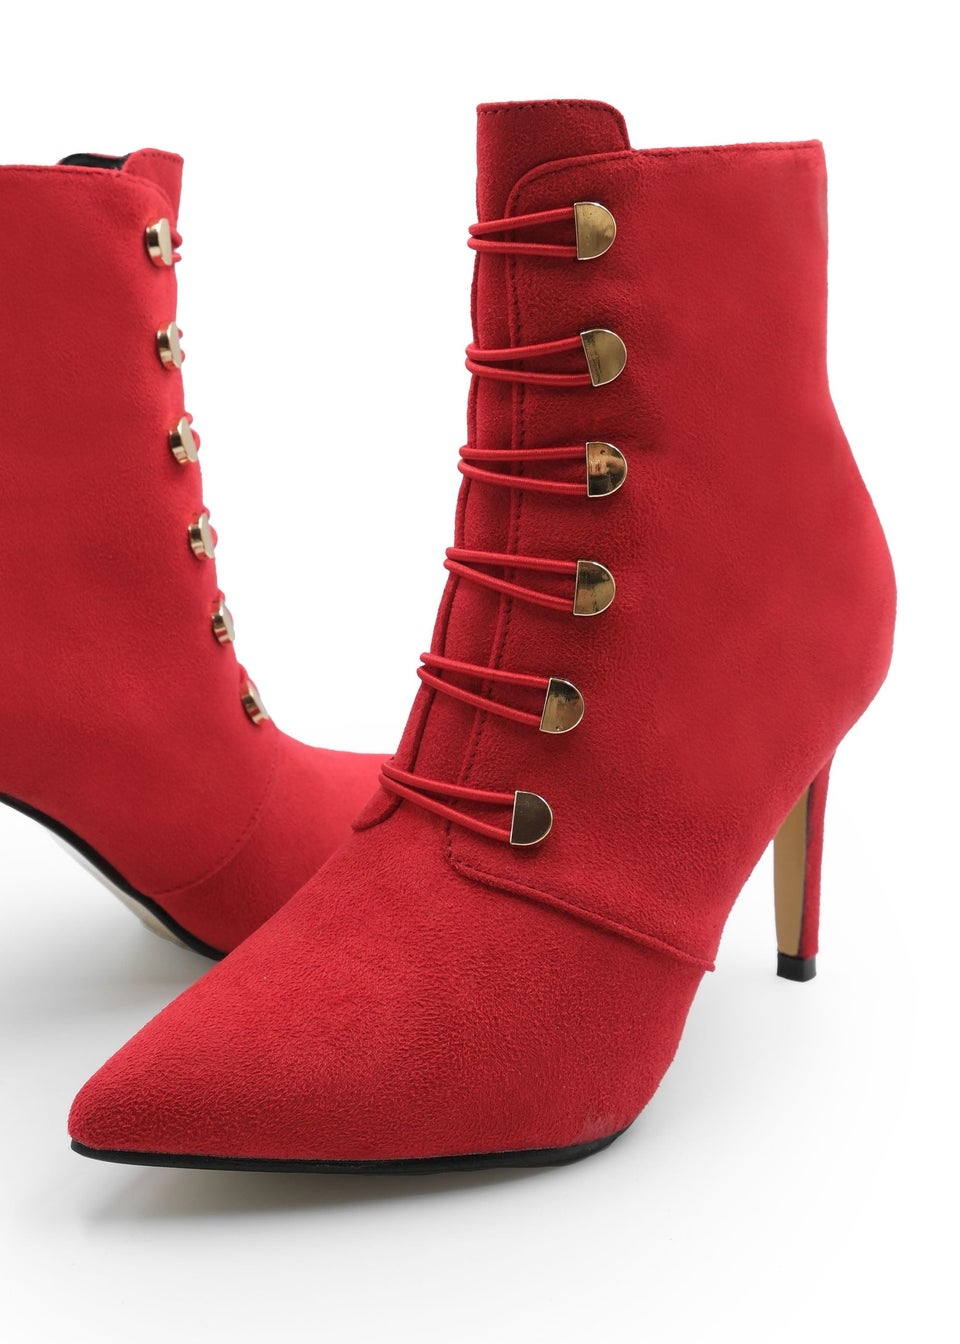 Where's That From Red Suede Blythe Pointed Toe Ankle Boots